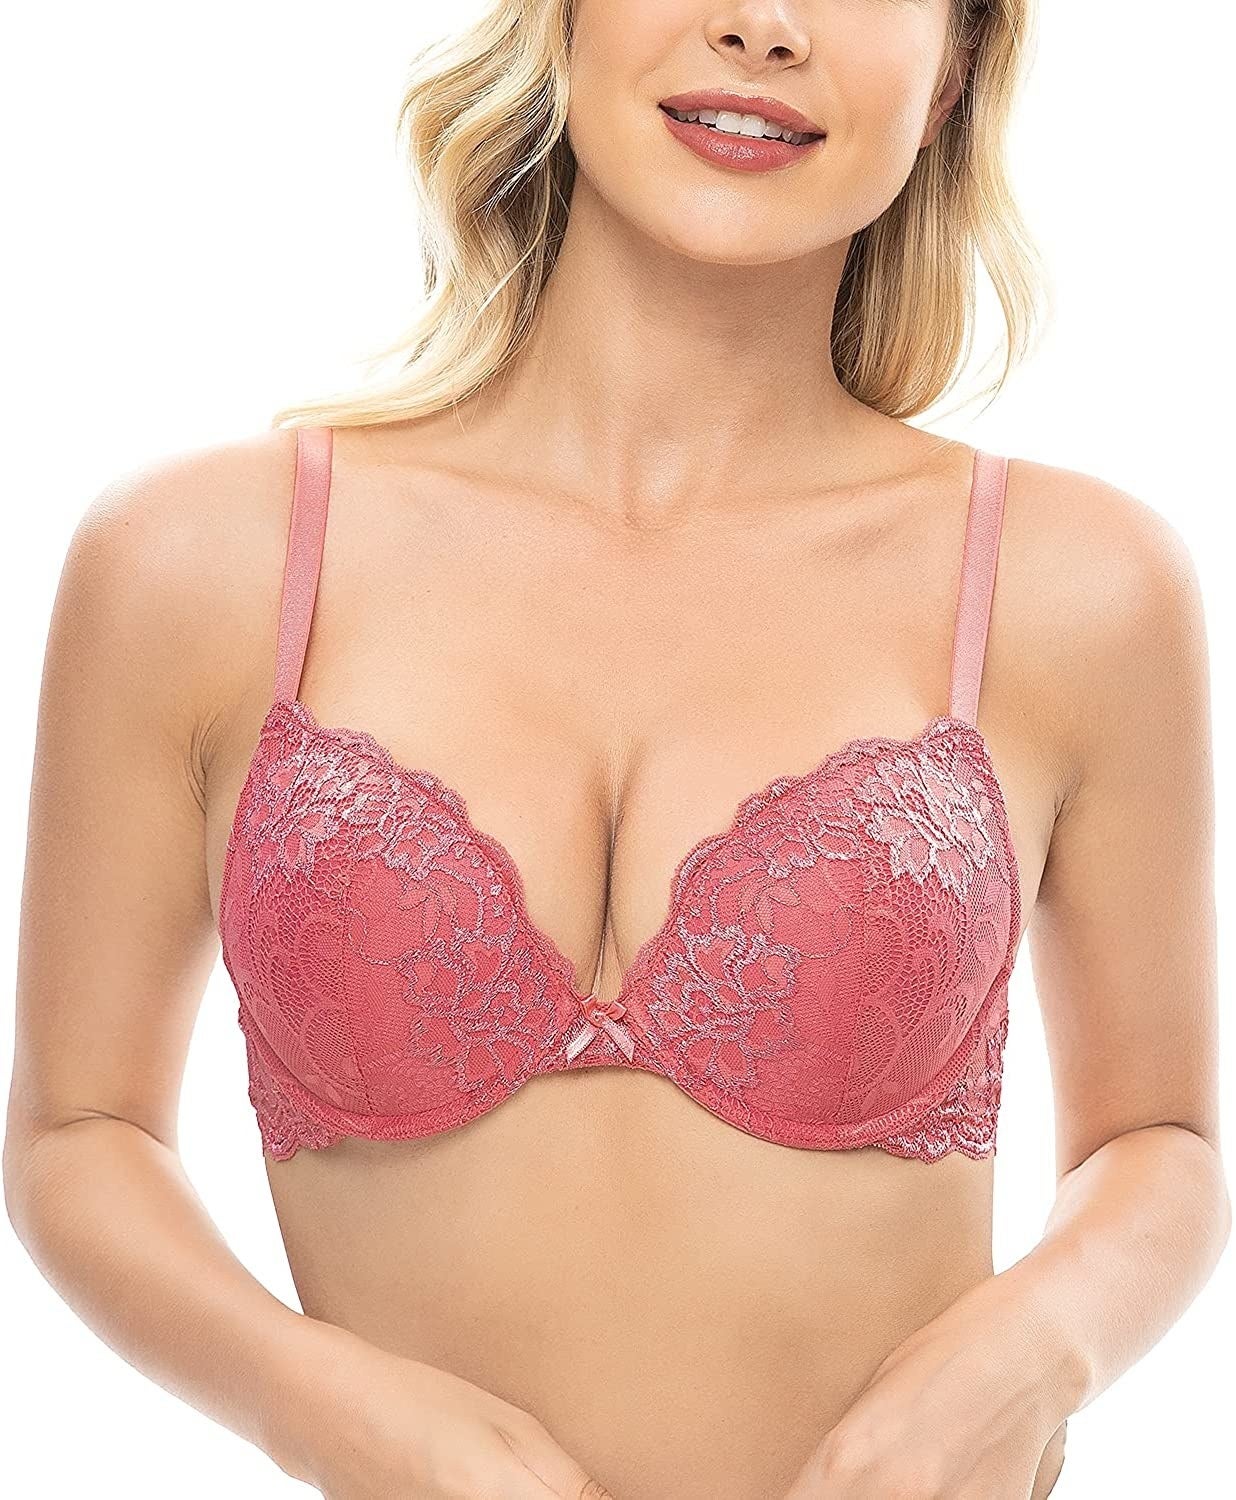 Triumph - Our Lace Spotlight bra is always a treat! With its ultra